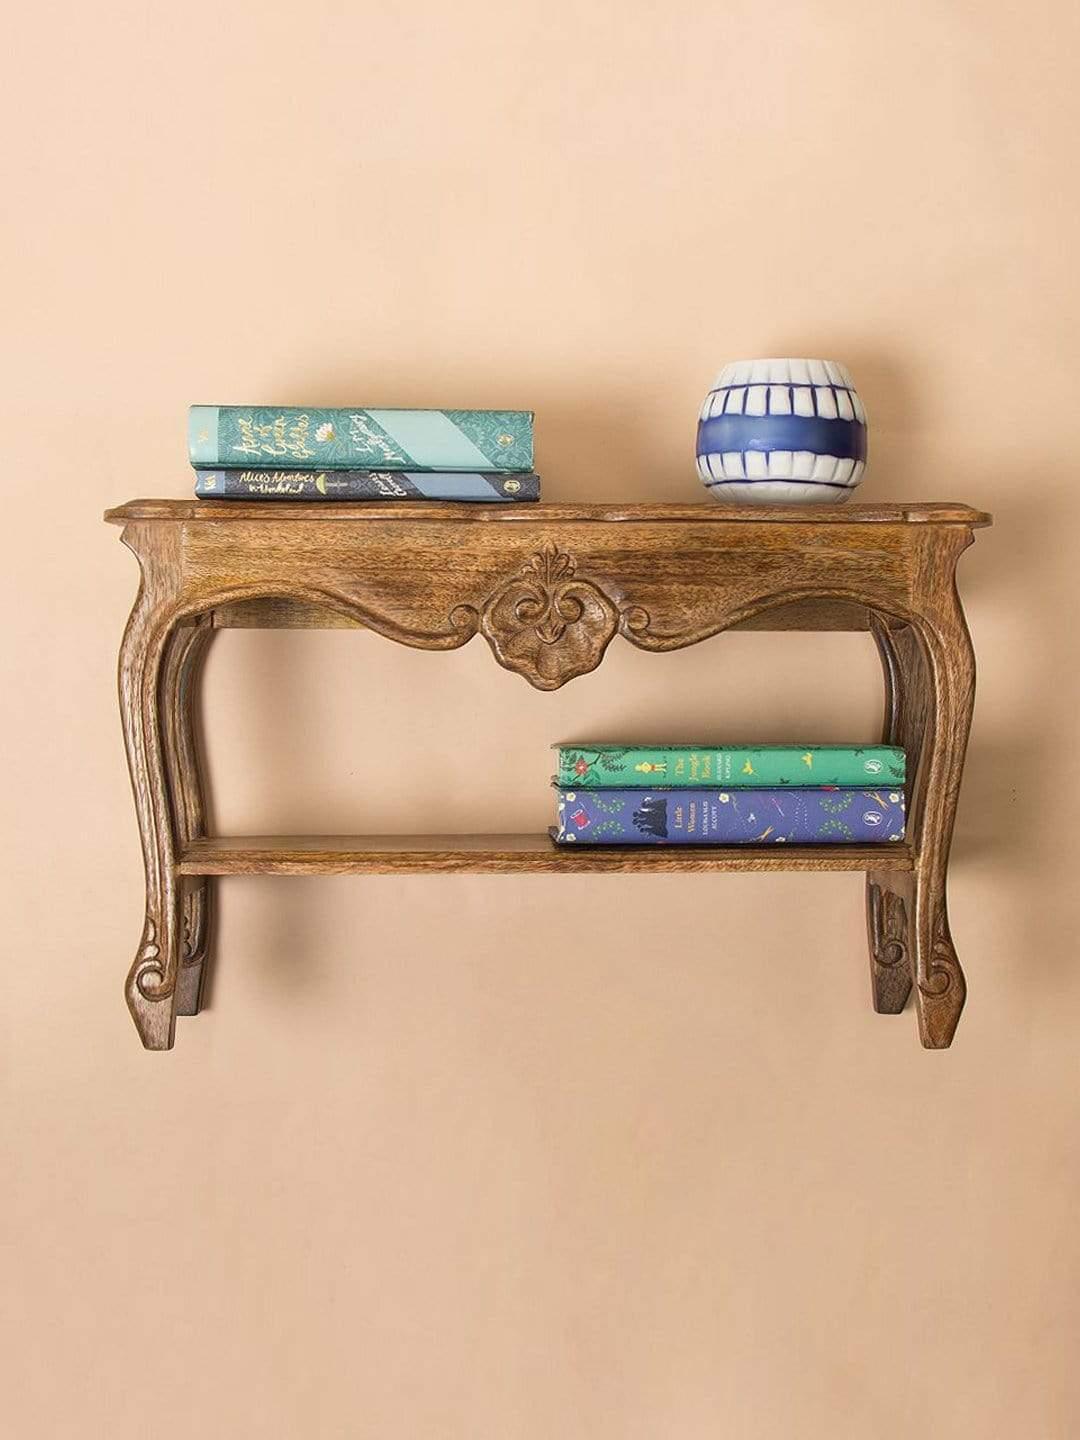 Alice Mini Table Handcrafted Wooden Wall Shelf - The Wishing Chair